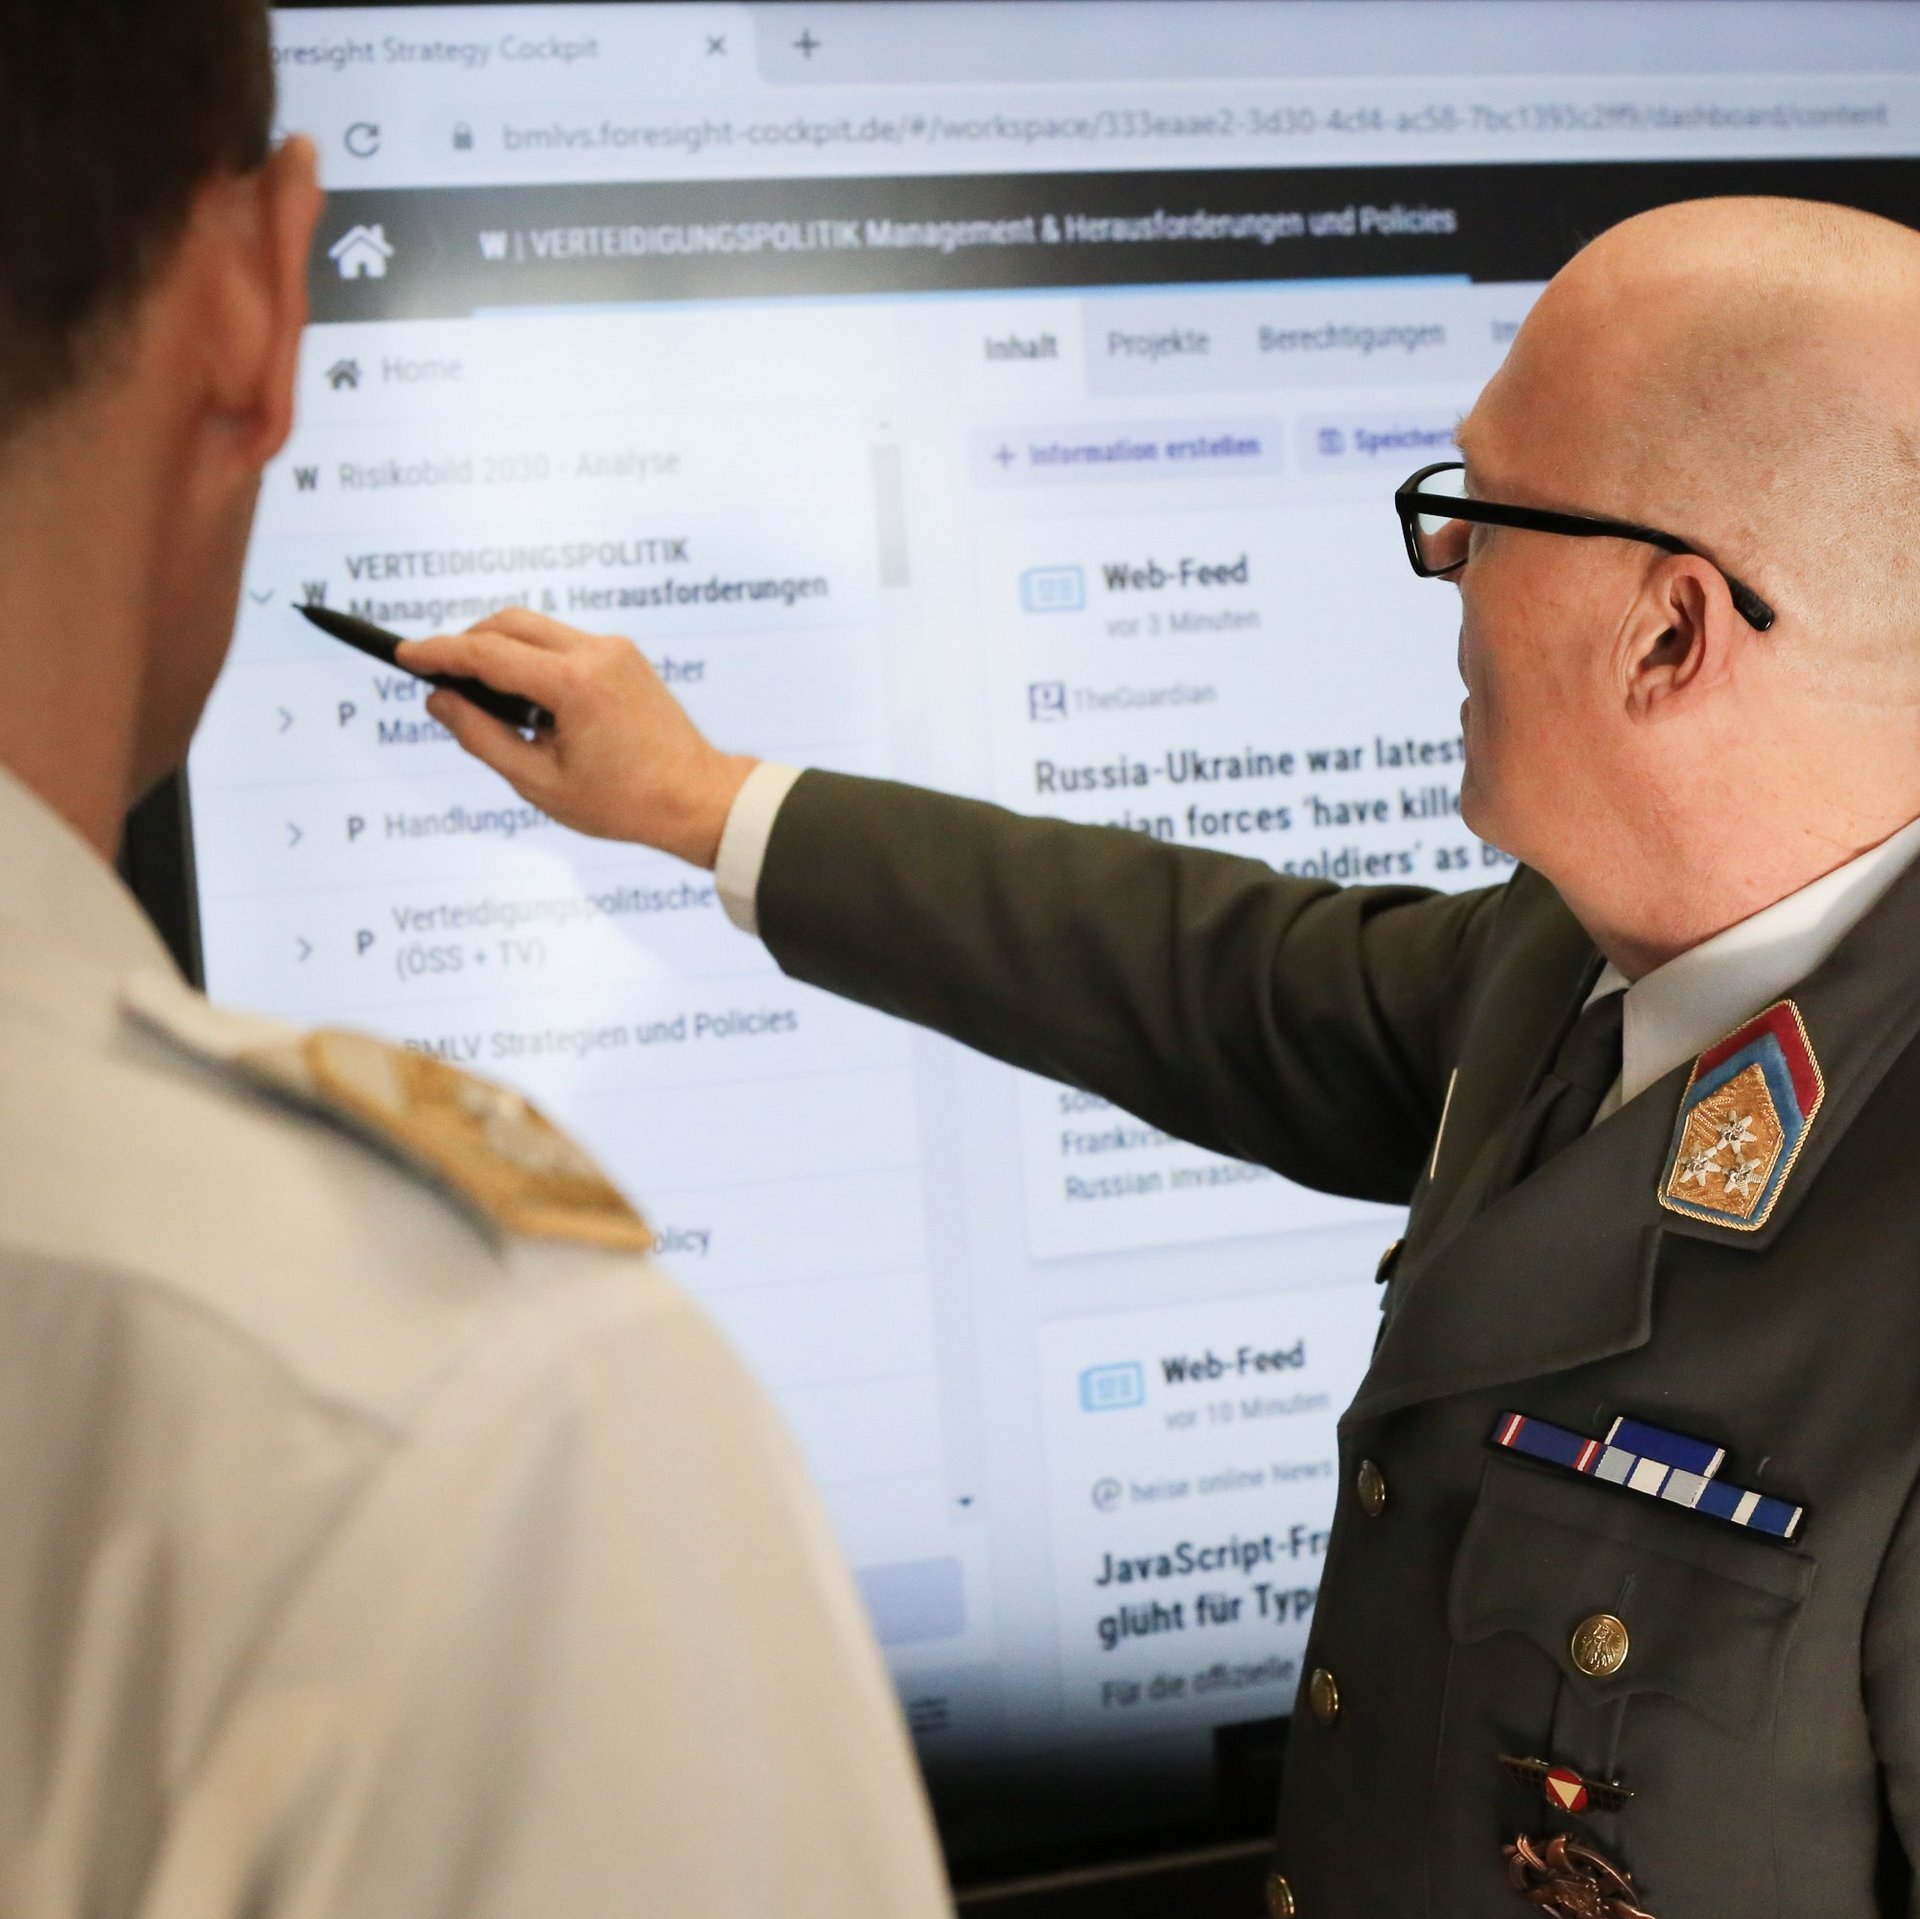 Defence policy experts discuss a security matter on a smartboard.